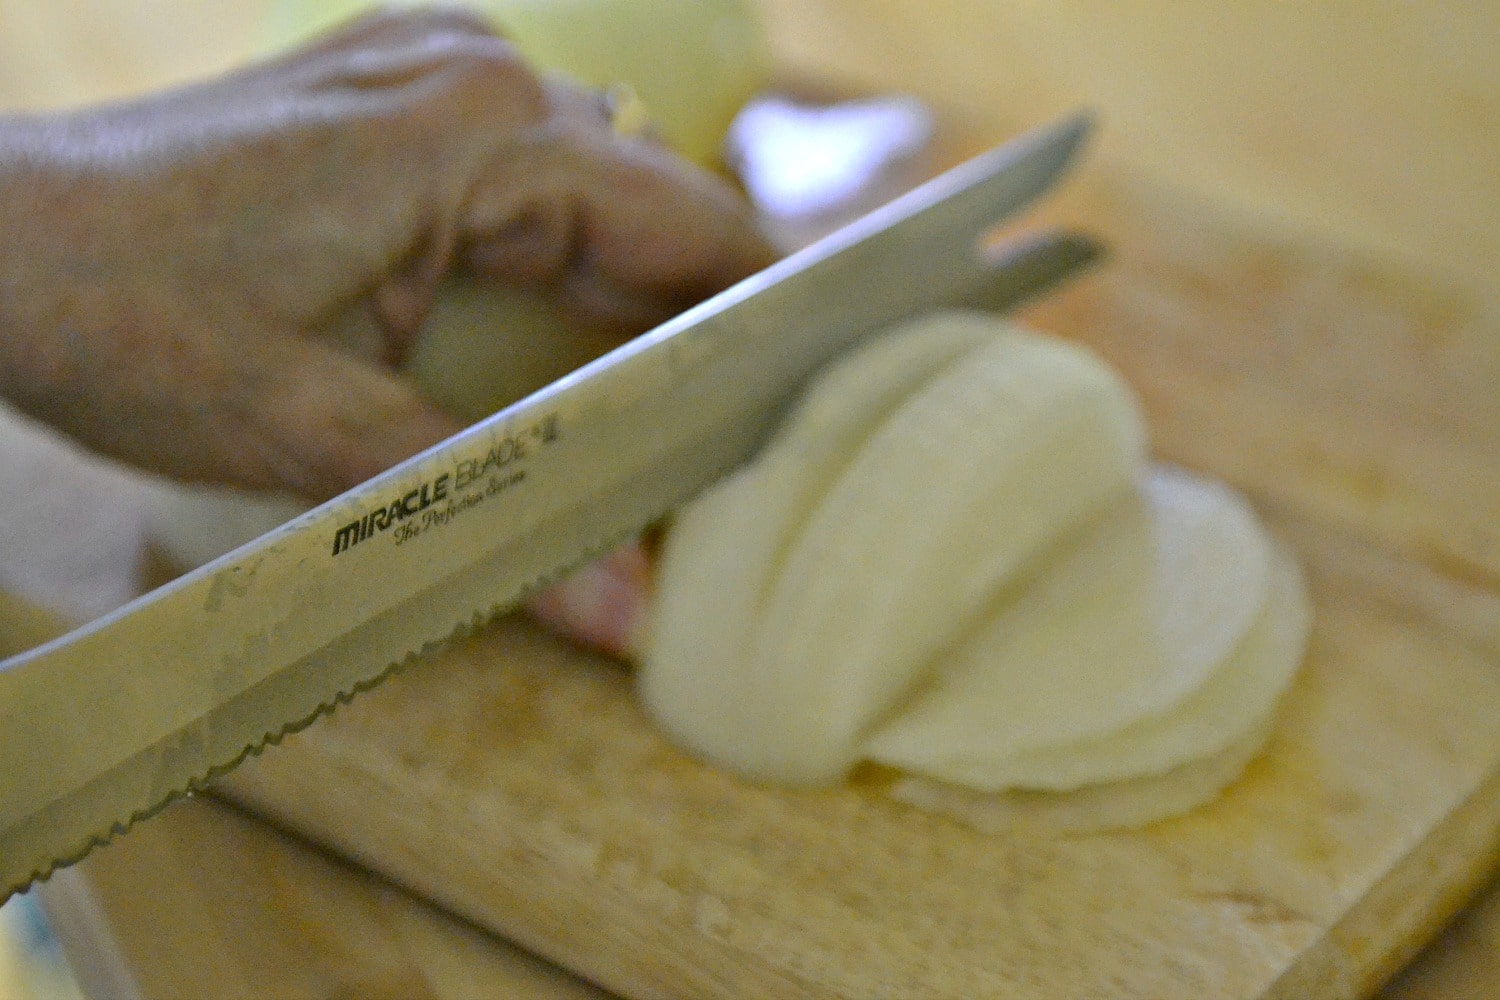 Remove outer layers from onions, cut in half then into thin slices.